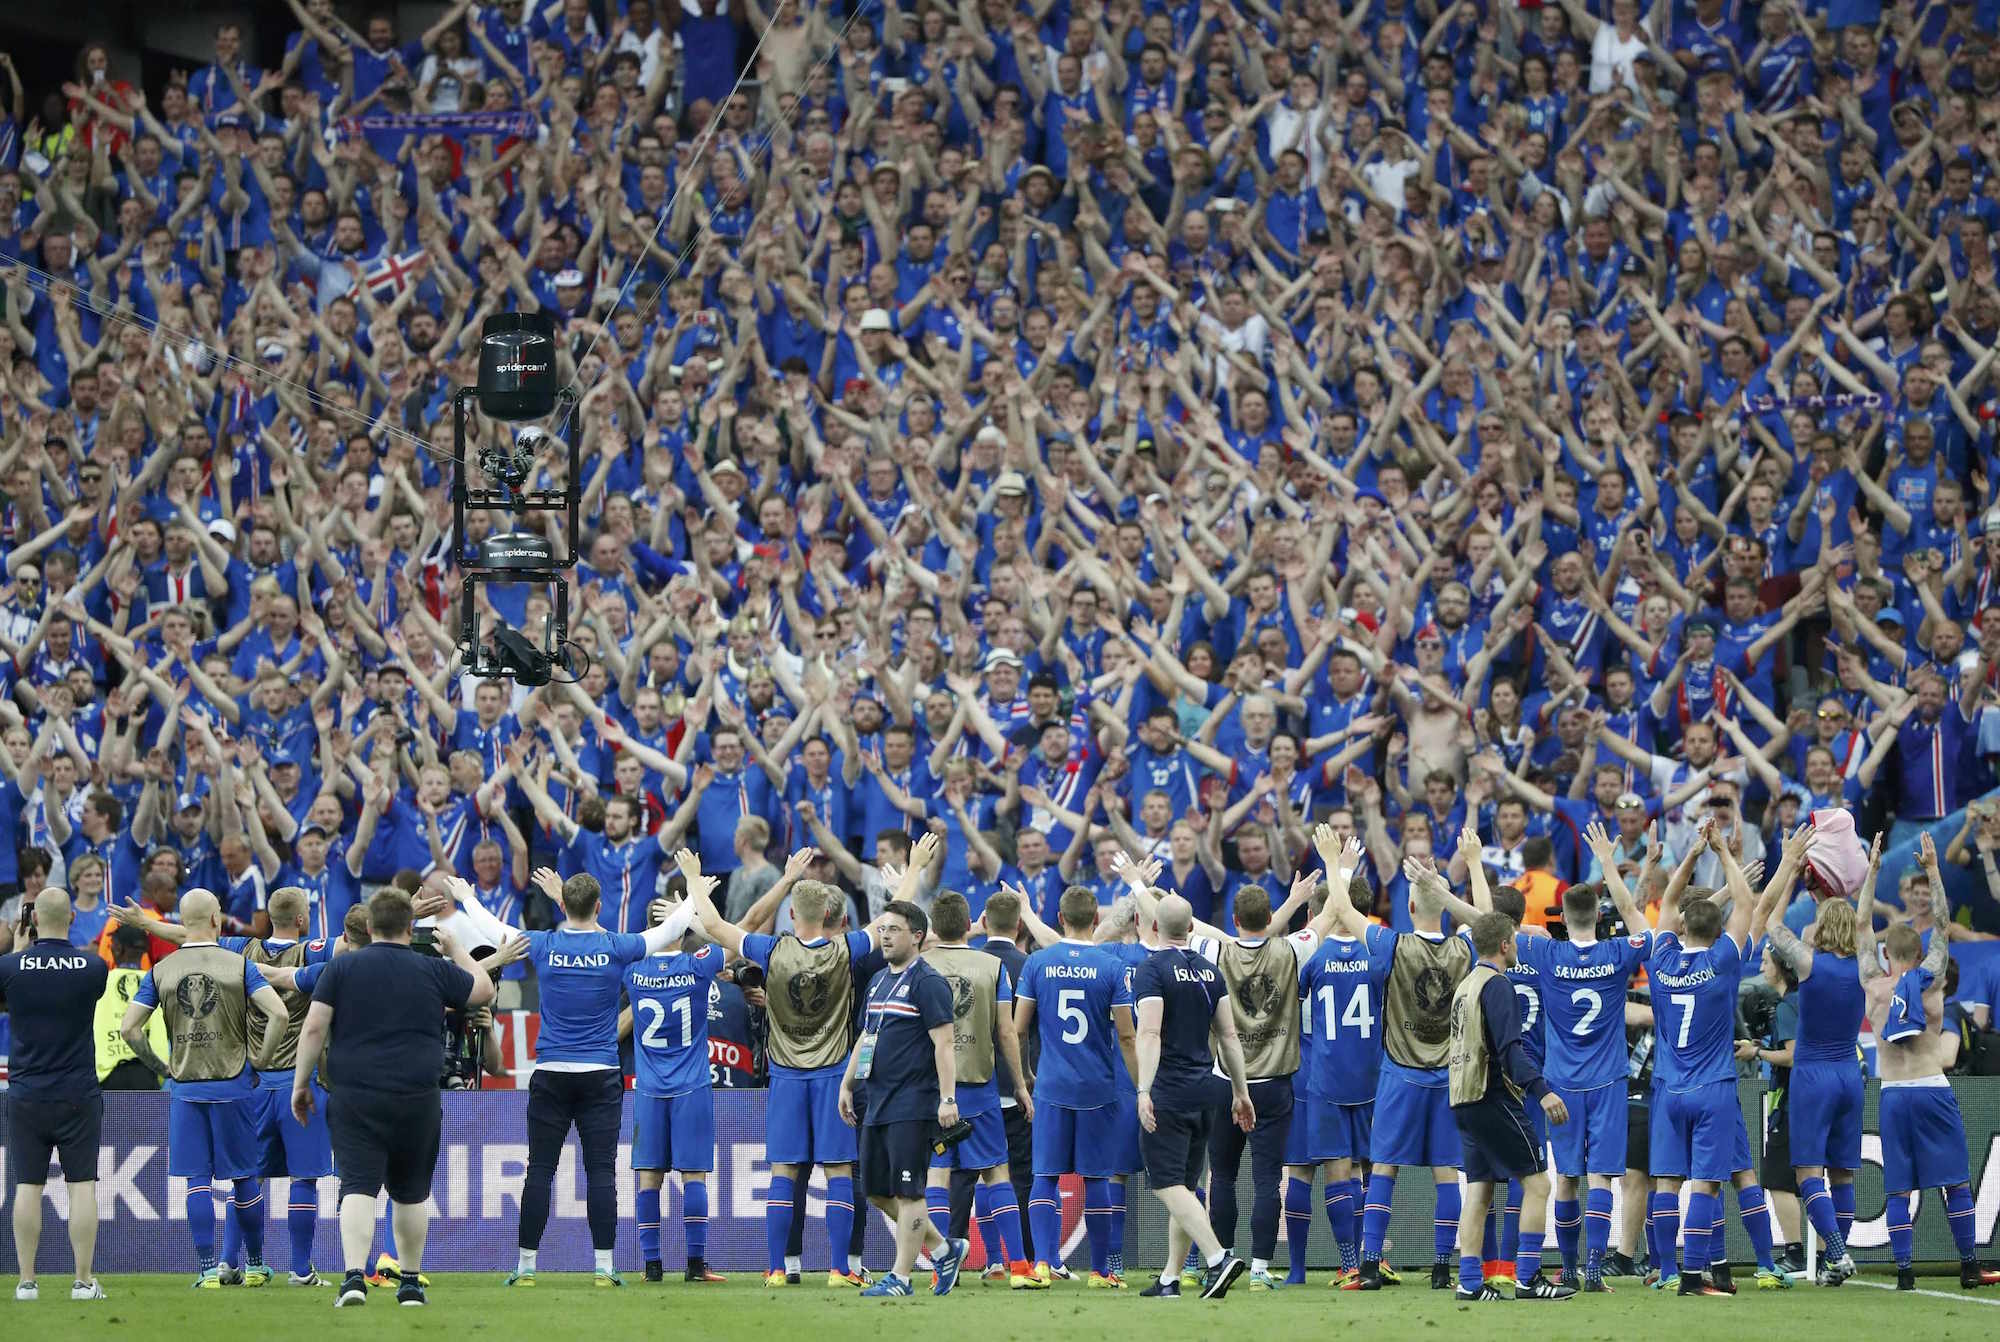 Football Soccer - Iceland v Austria - EURO 2016 - Group F - Stade de France - Paris Saint-Denis, France - 22/6/16 Iceland's players and fans celebrate after the match REUTERS/Christian Hartmann TPX IMAGES OF THE DAY